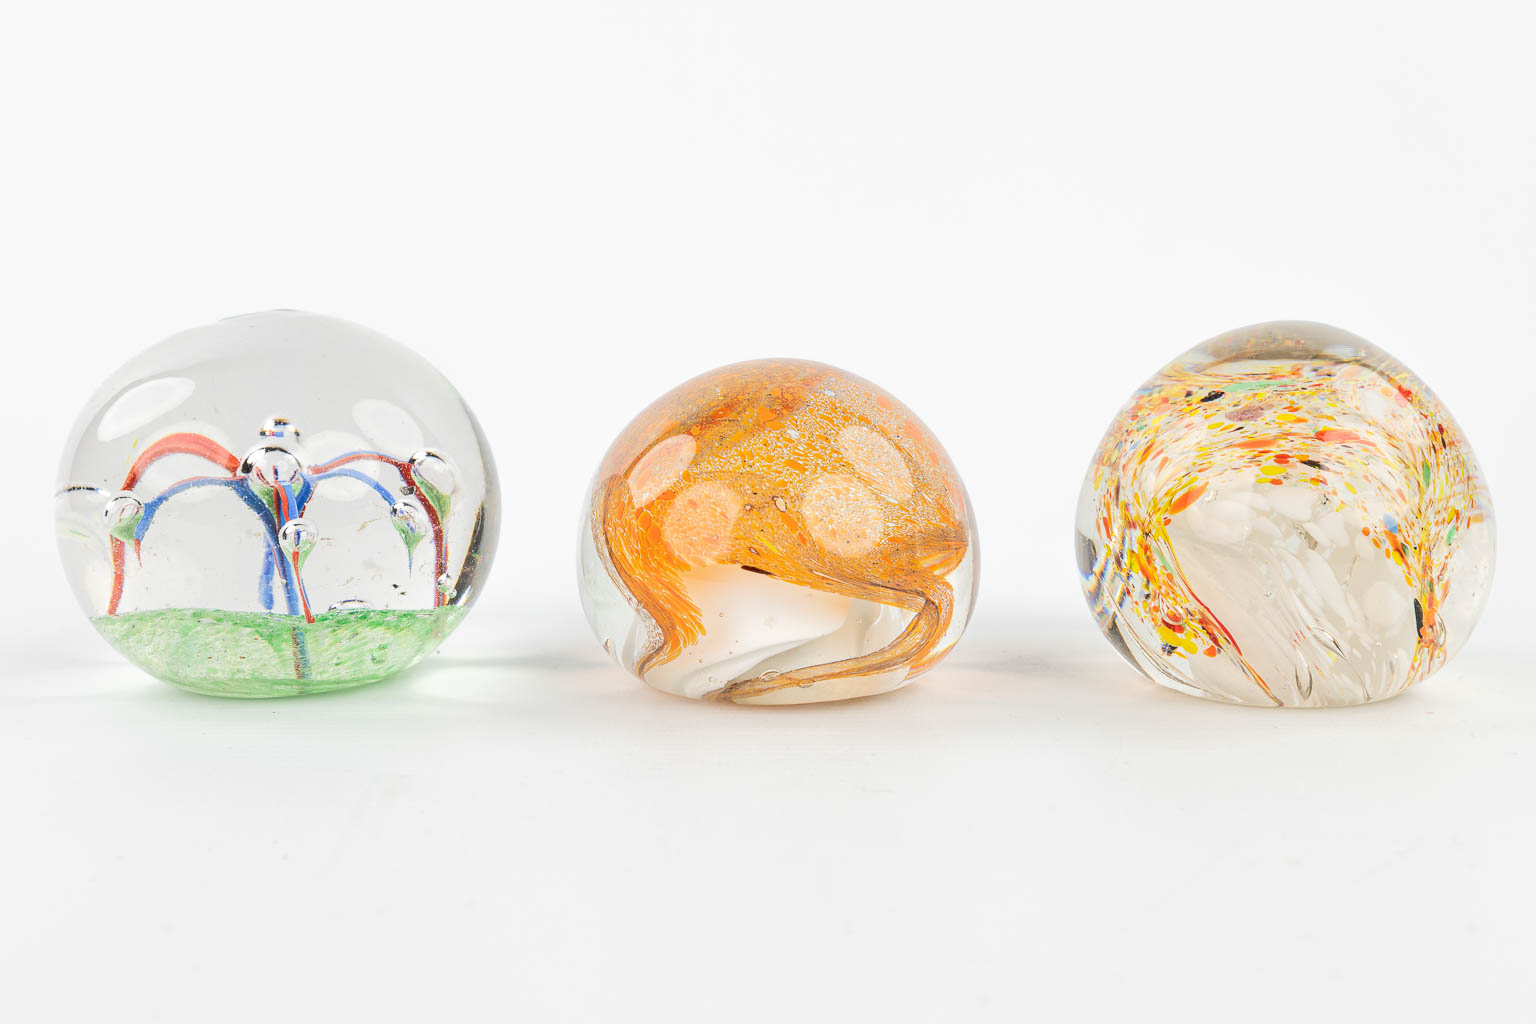 A collection of 7 paperweights made in Murano and decorated with abstract glass art. (H:7,5cm)